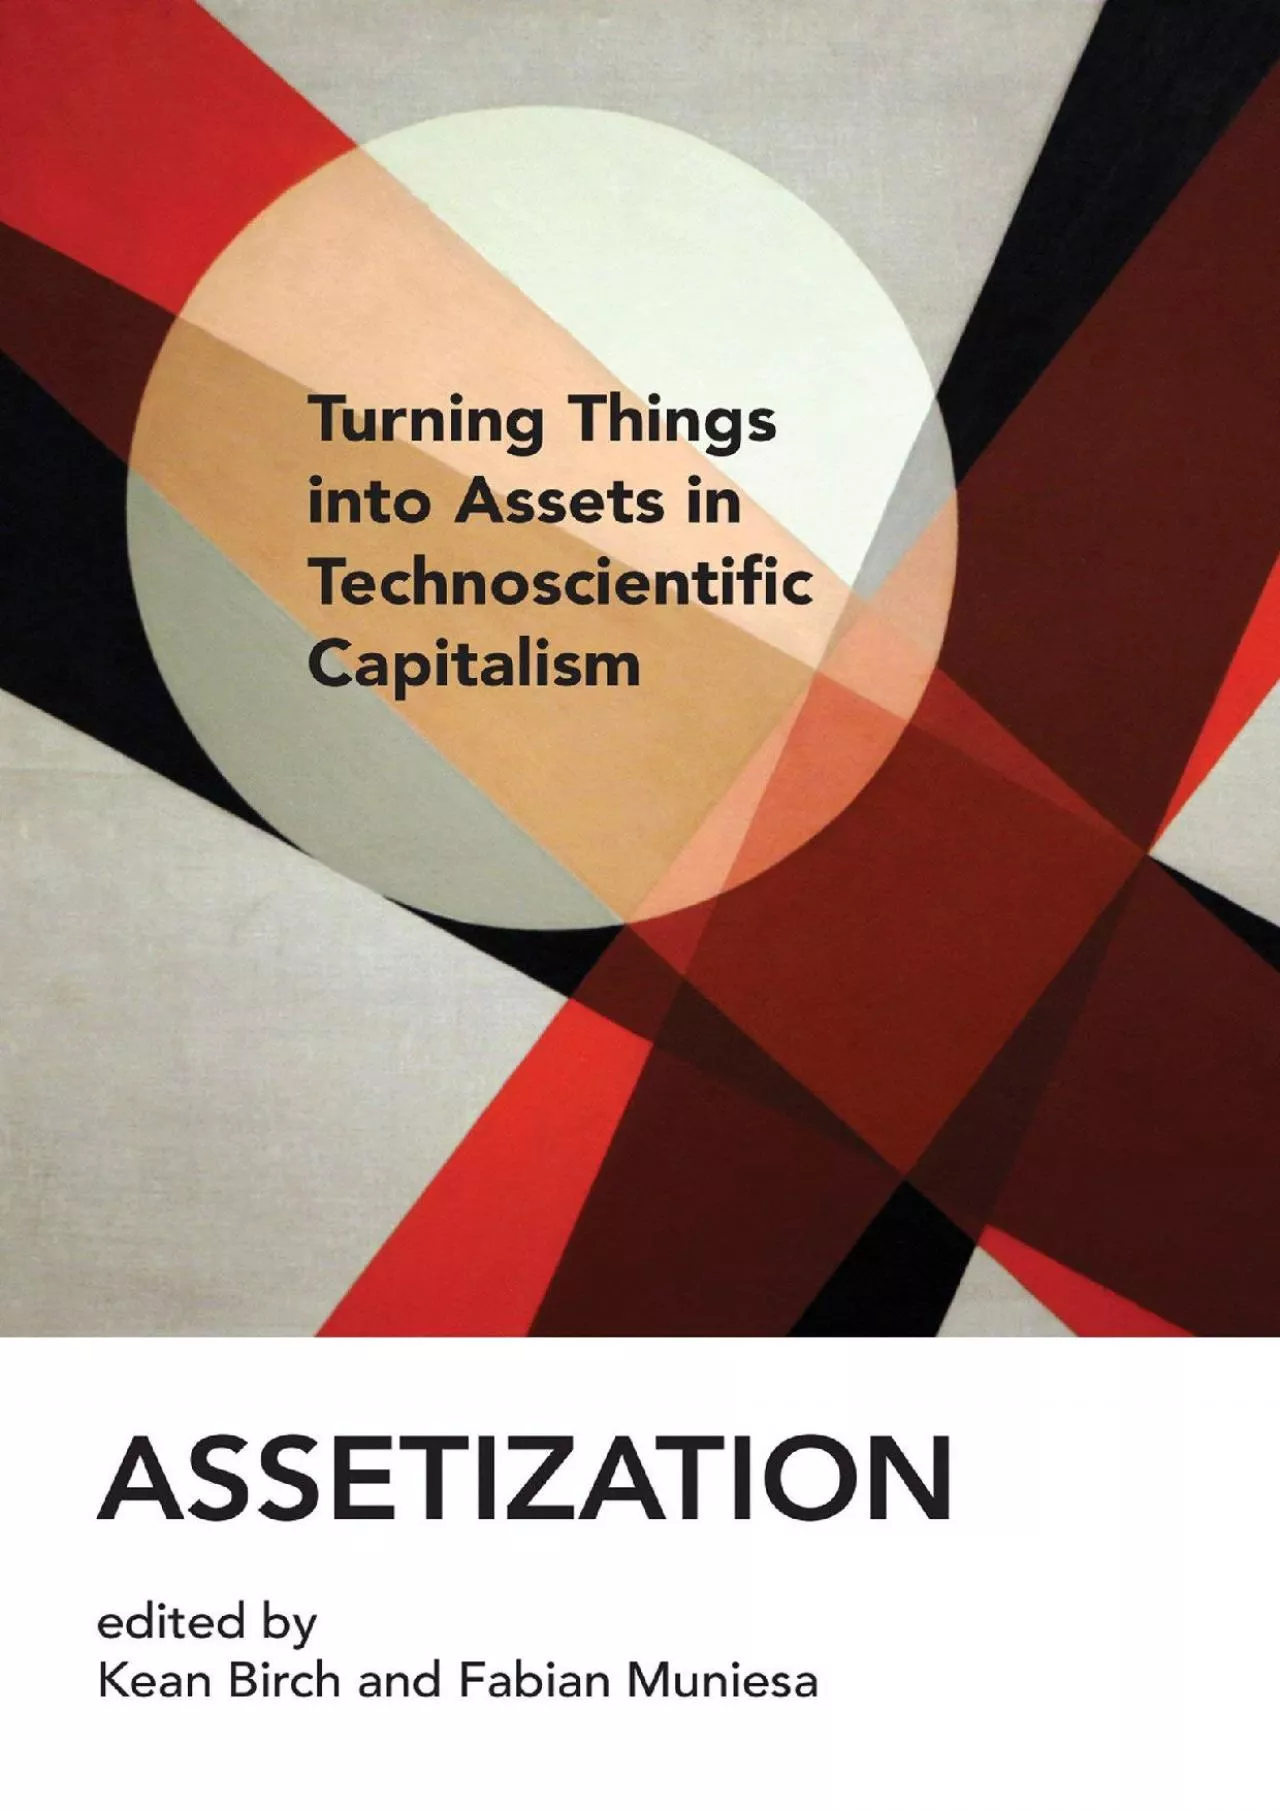 (BOOK)-Assetization: Turning Things into Assets in Technoscientific Capitalism (Inside